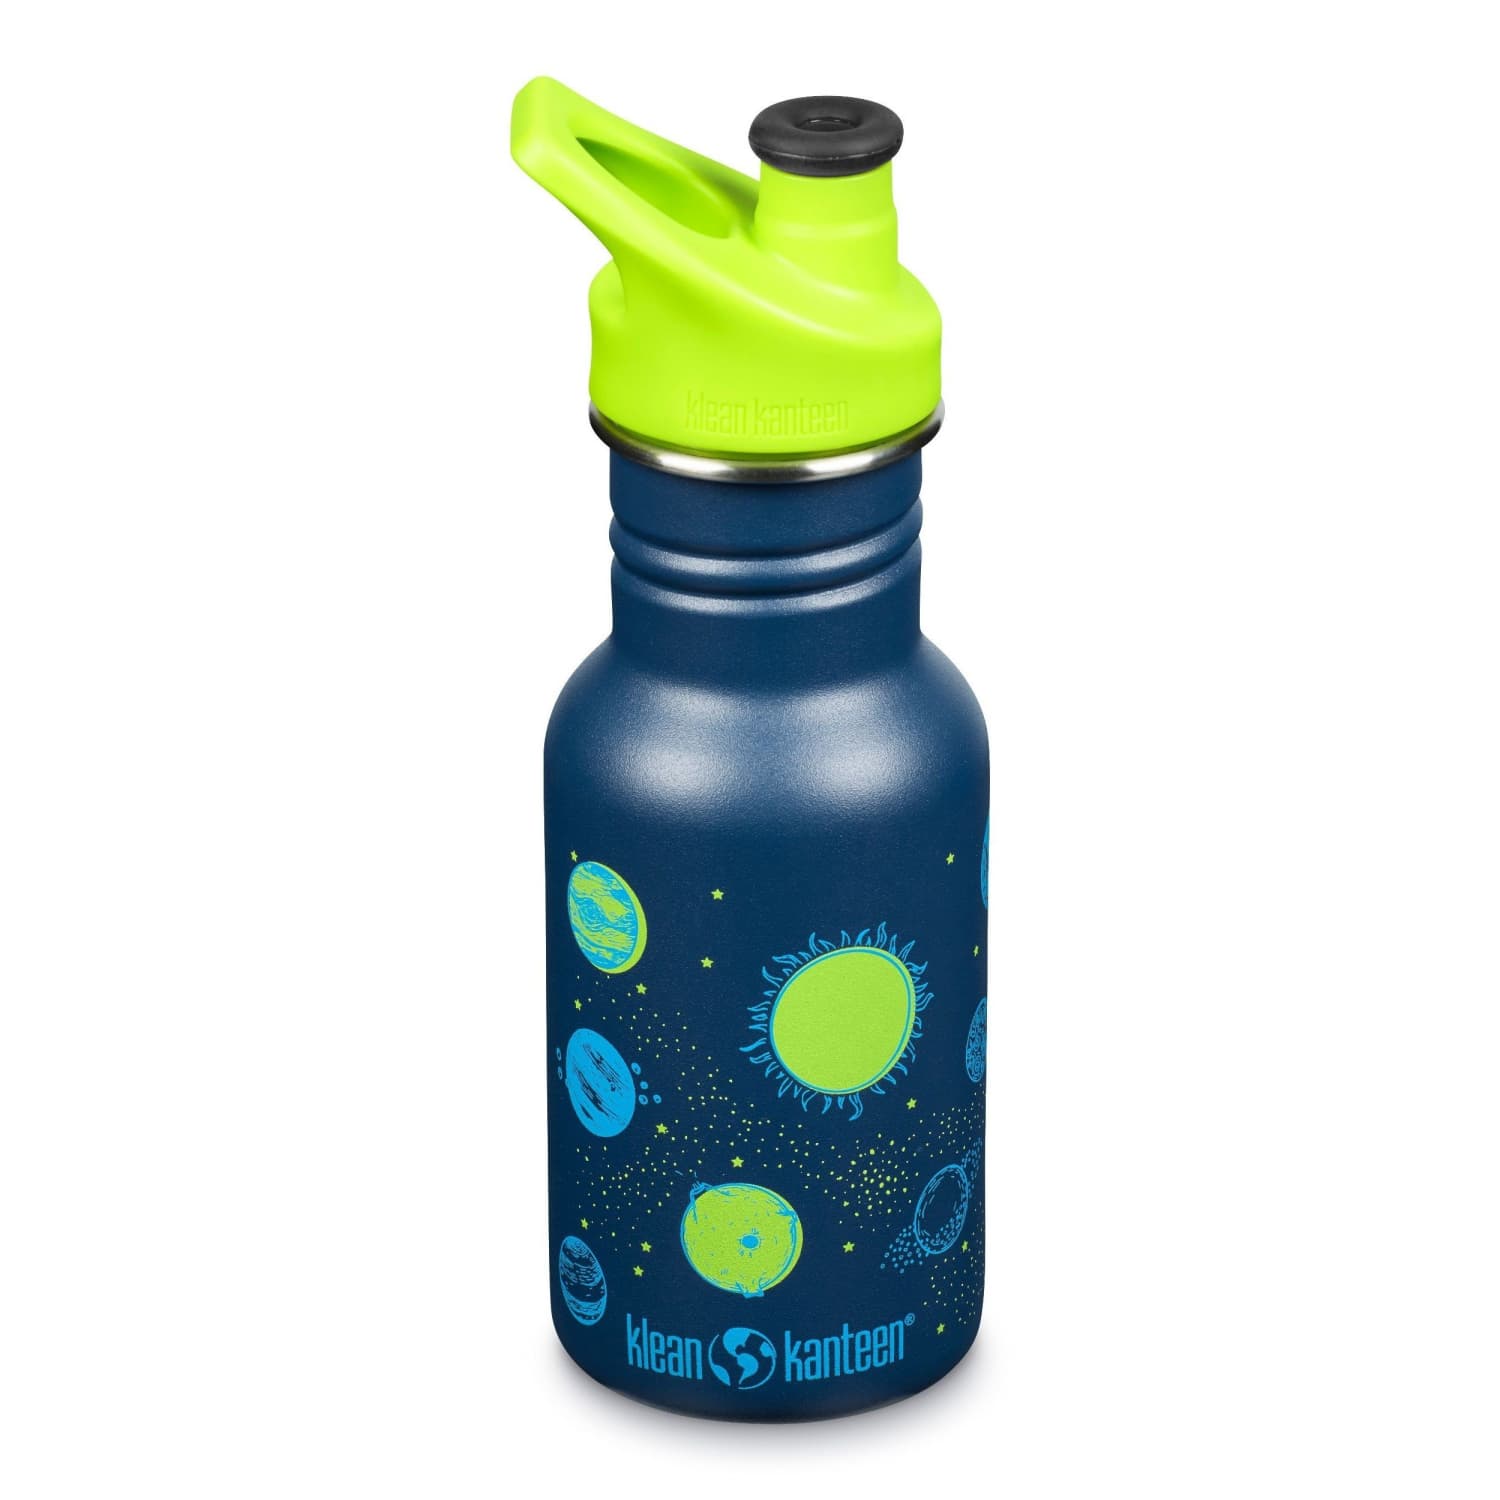 Klean kanteen kids reusable water bottle stainless steel chip resistant blue planets